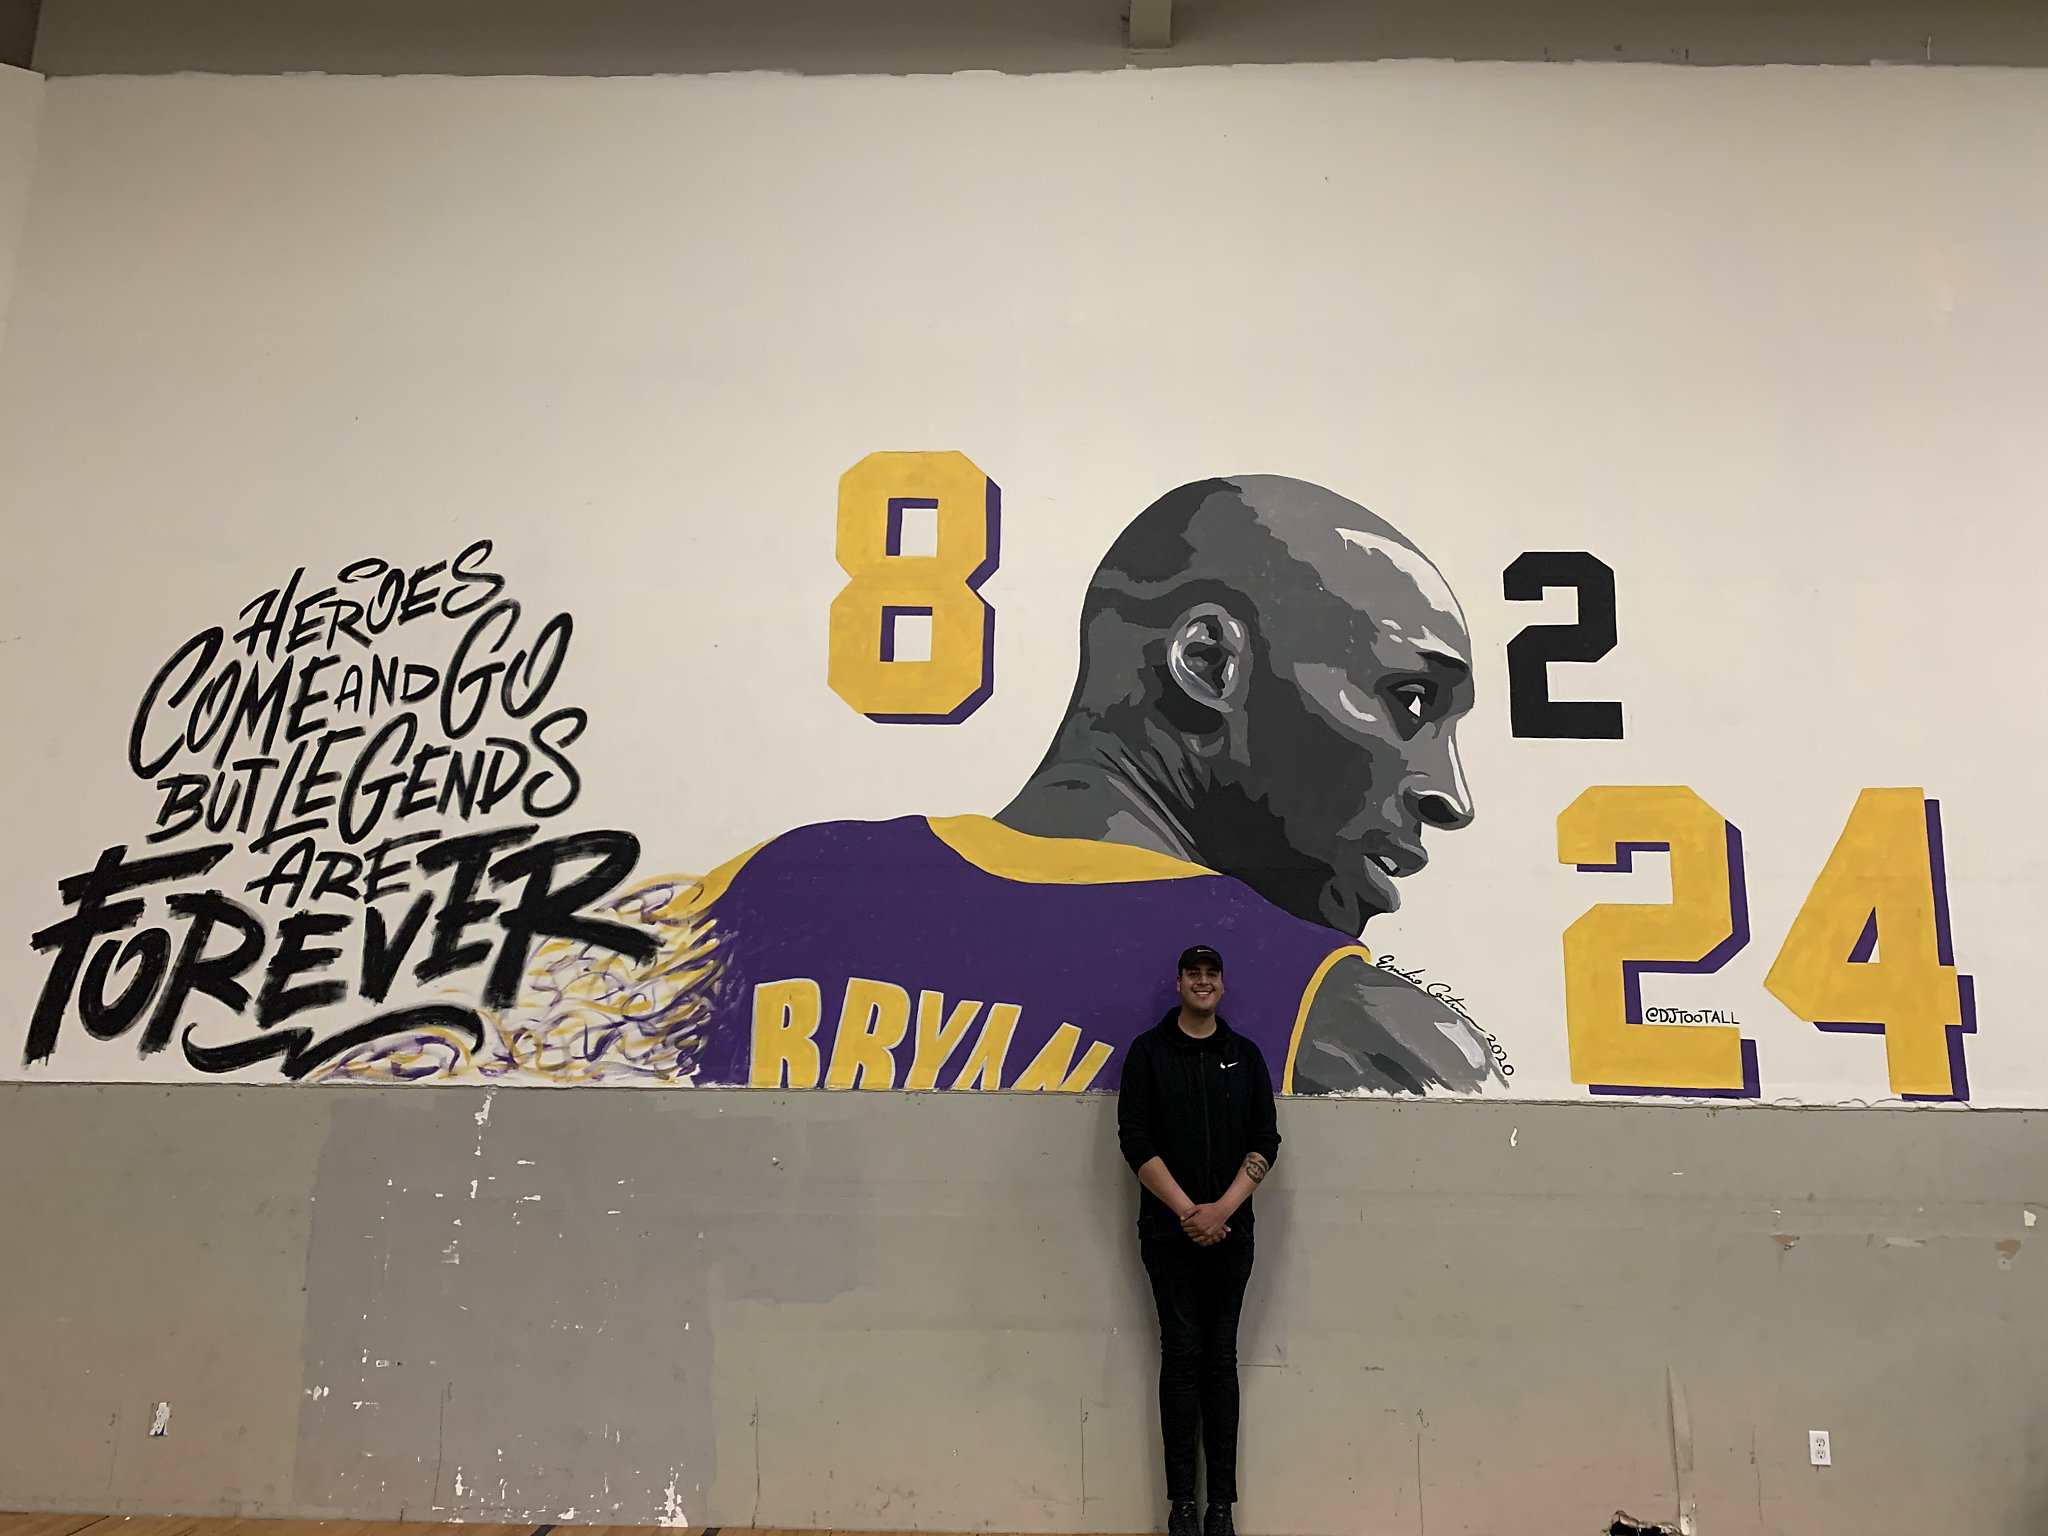 Cartoons: Kobe Bryant's death, memorialized by artists around the world